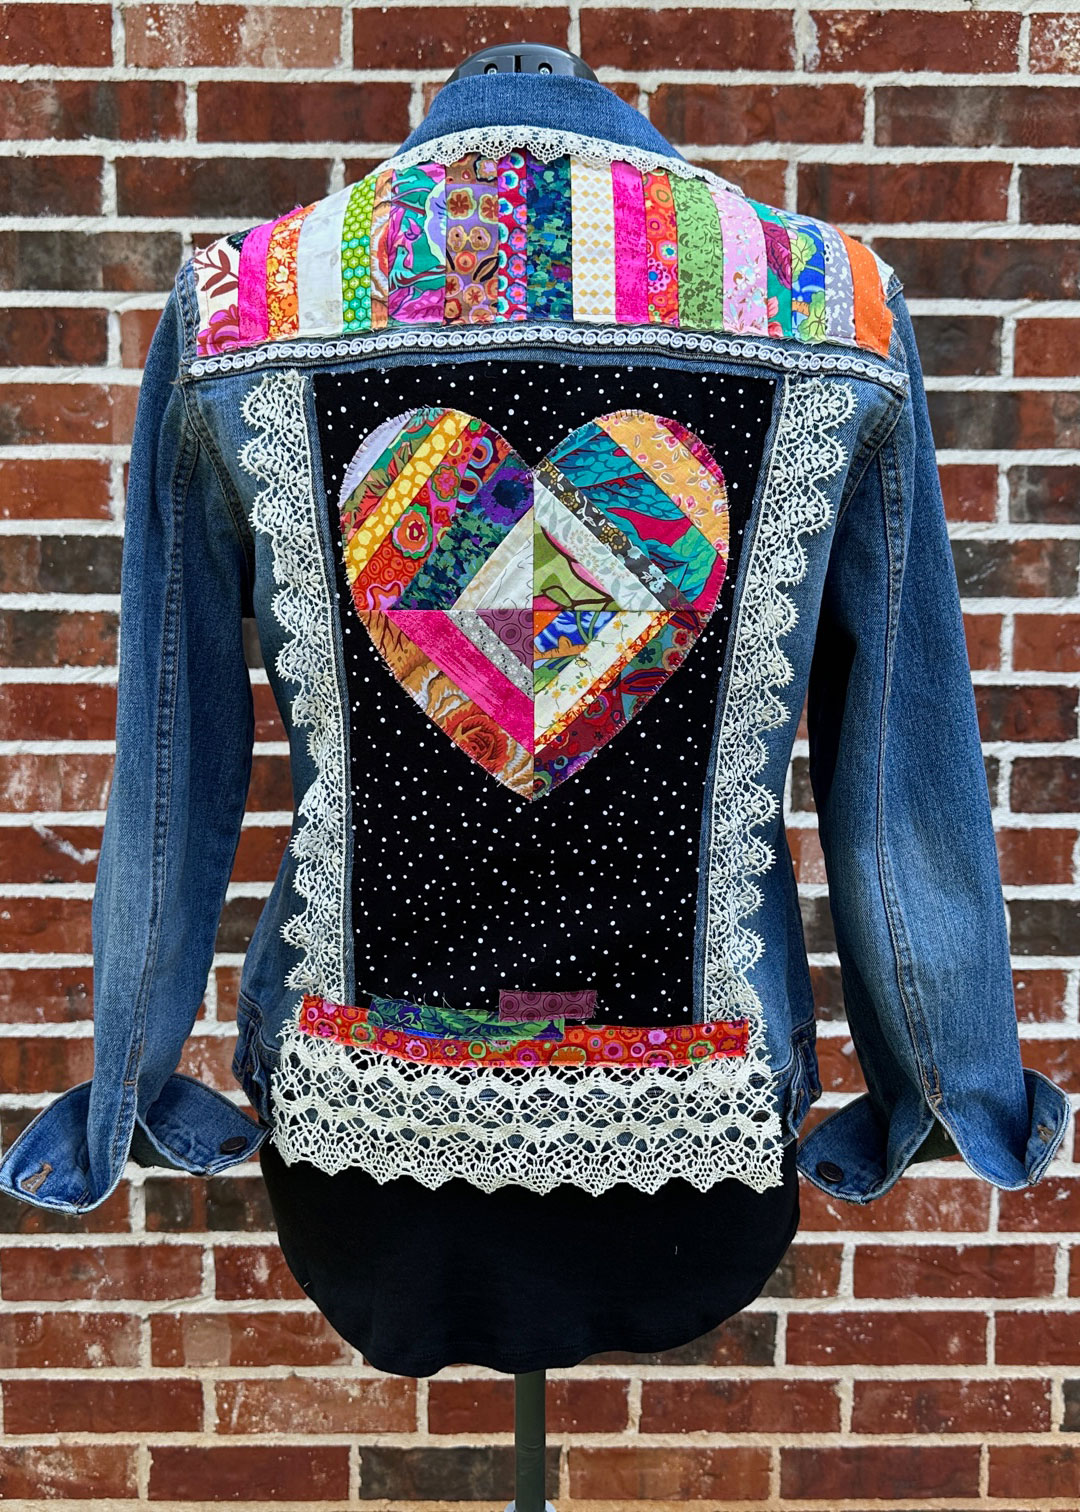 DIY Jean Jacket Ideas | Upcycle That